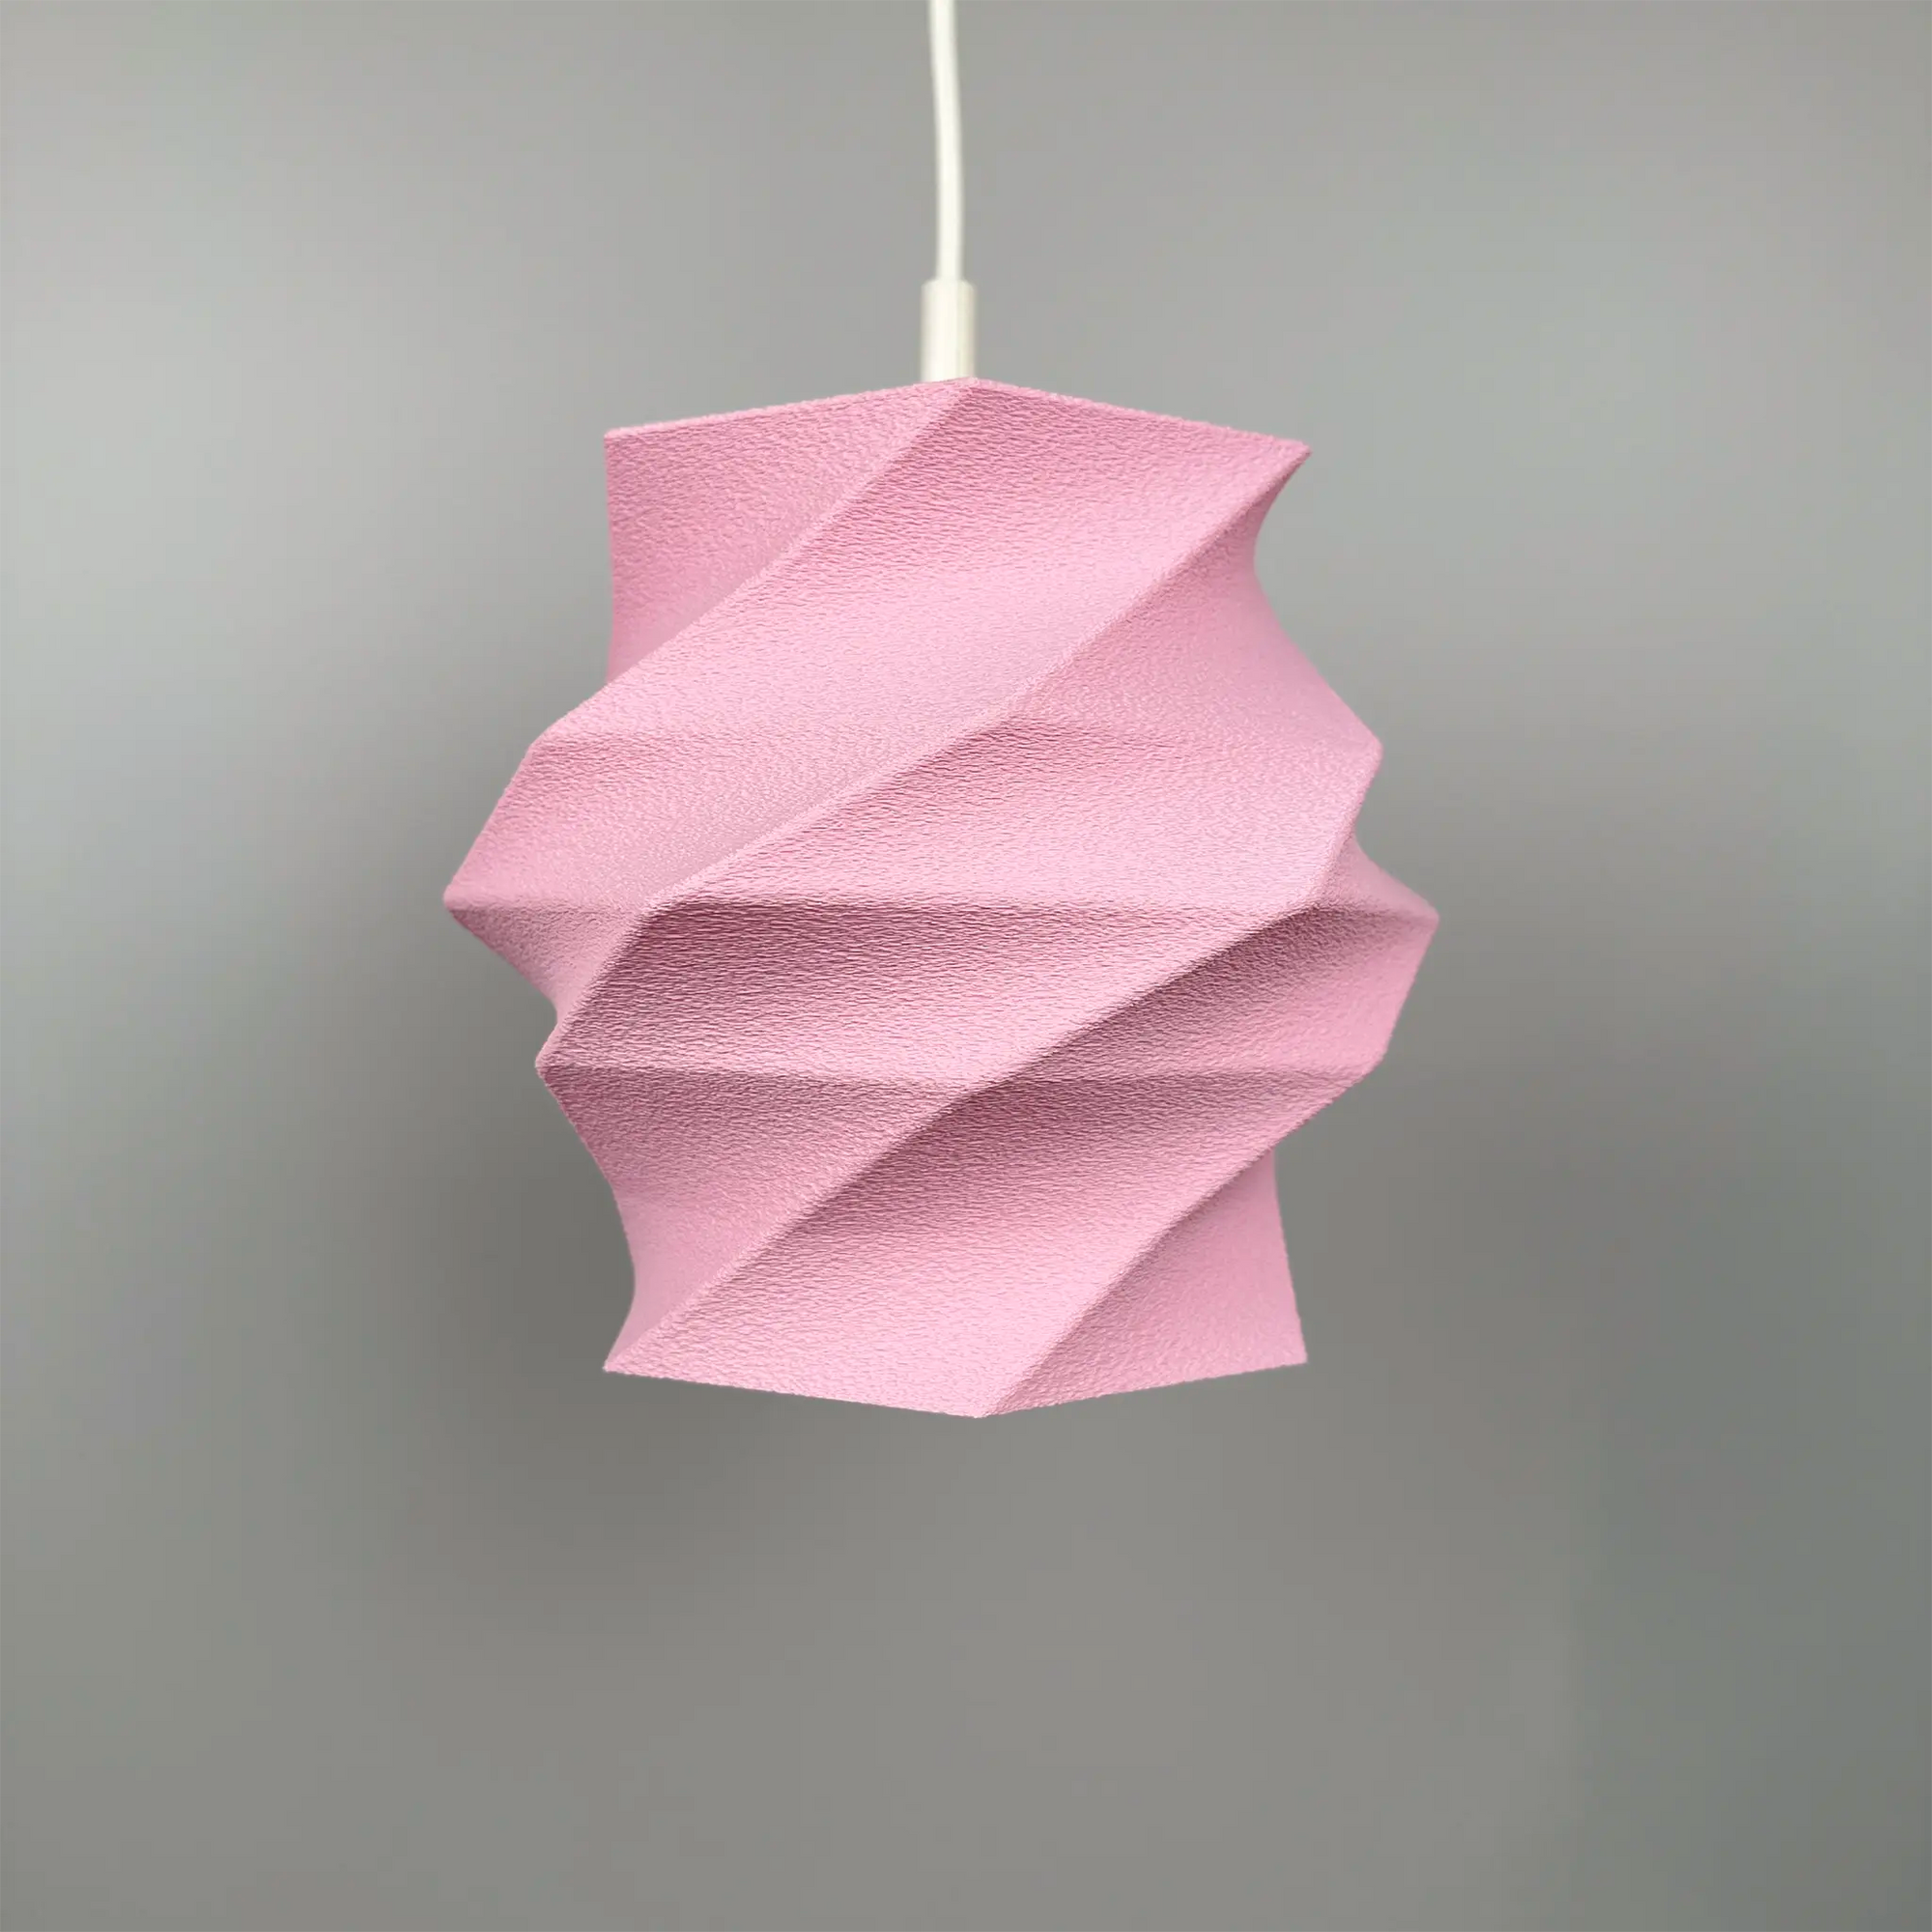 The Flowing Fuzzy Skin Lampshade